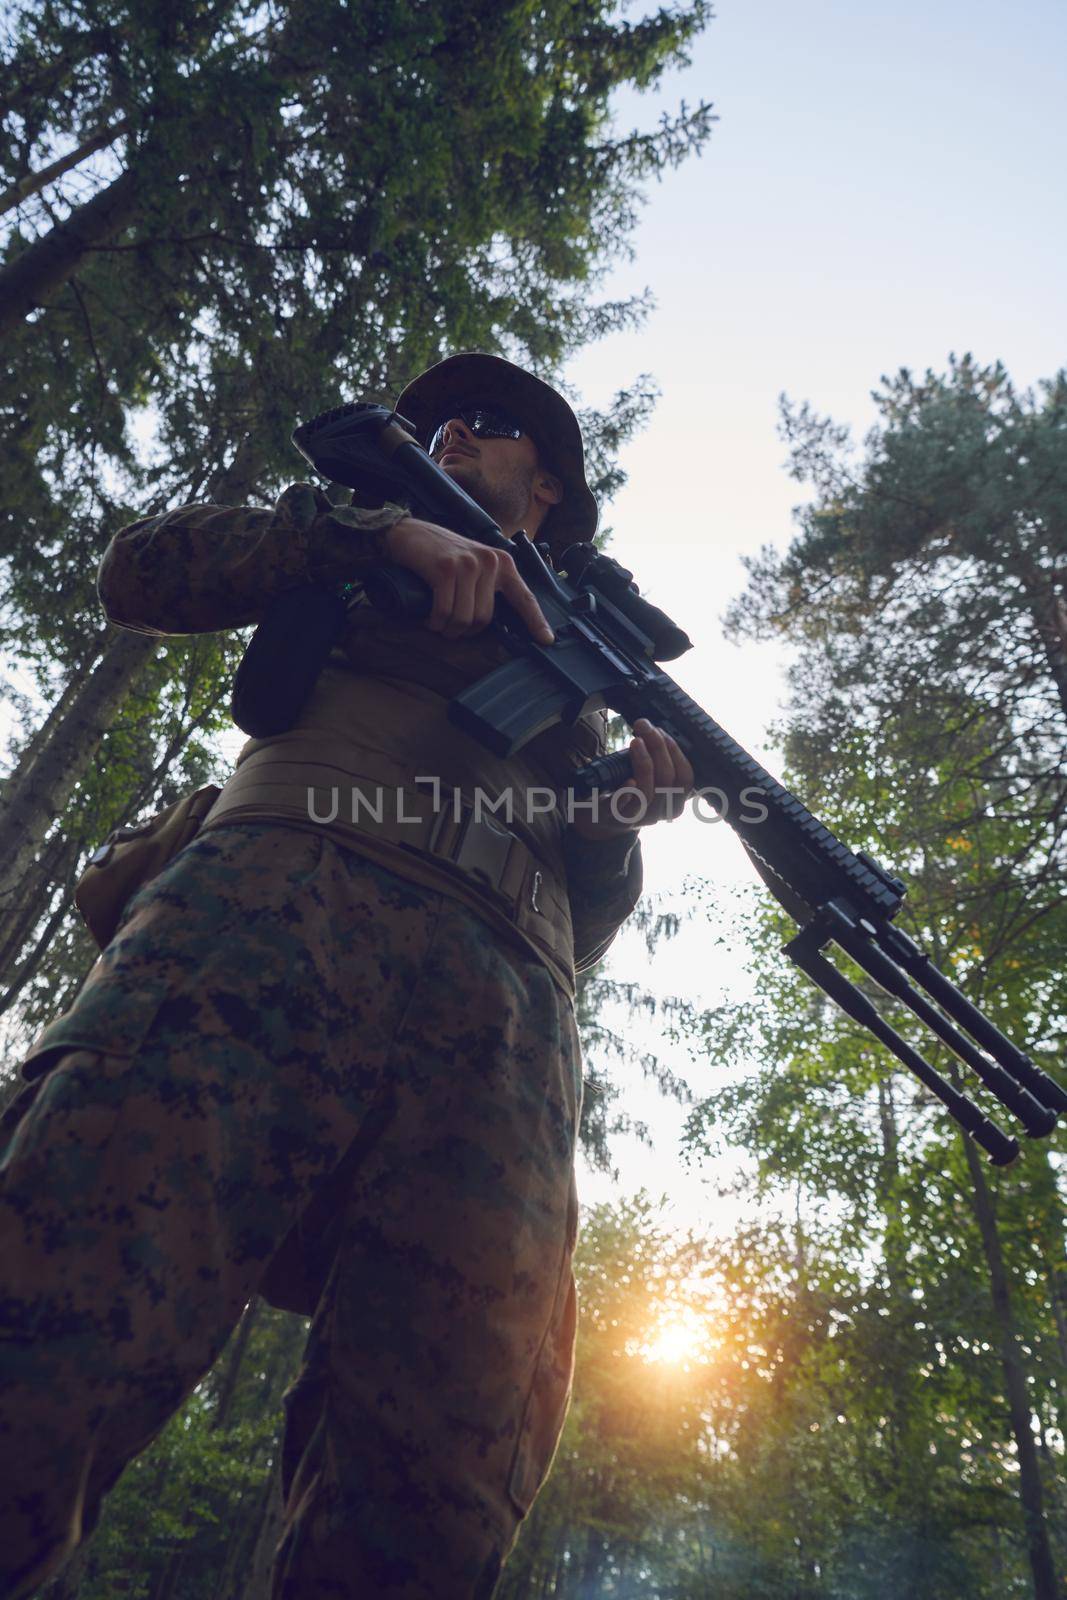 soldier portrait with  protective army tactical gear  and weapon having a break and relaxing